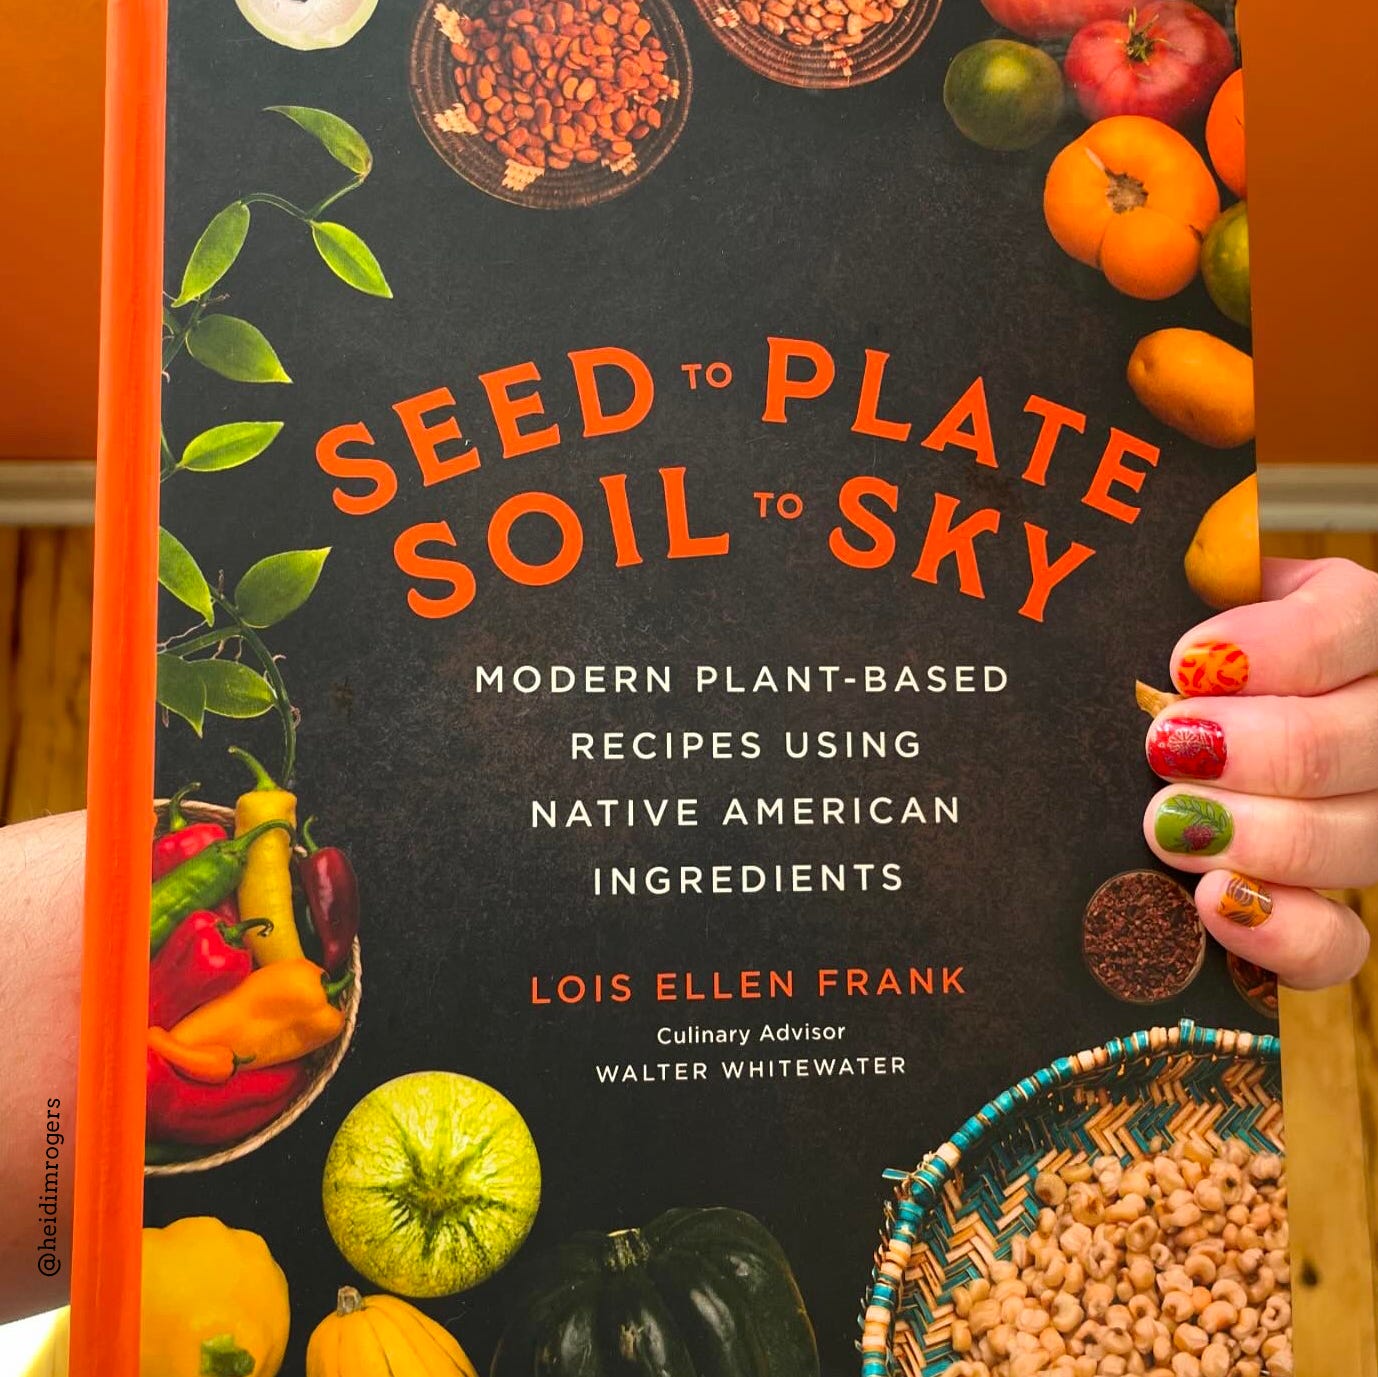 White woman's hand is holding the cookbook, Seed to Plate Soil to Sky, over a wood floor and orange wall background.